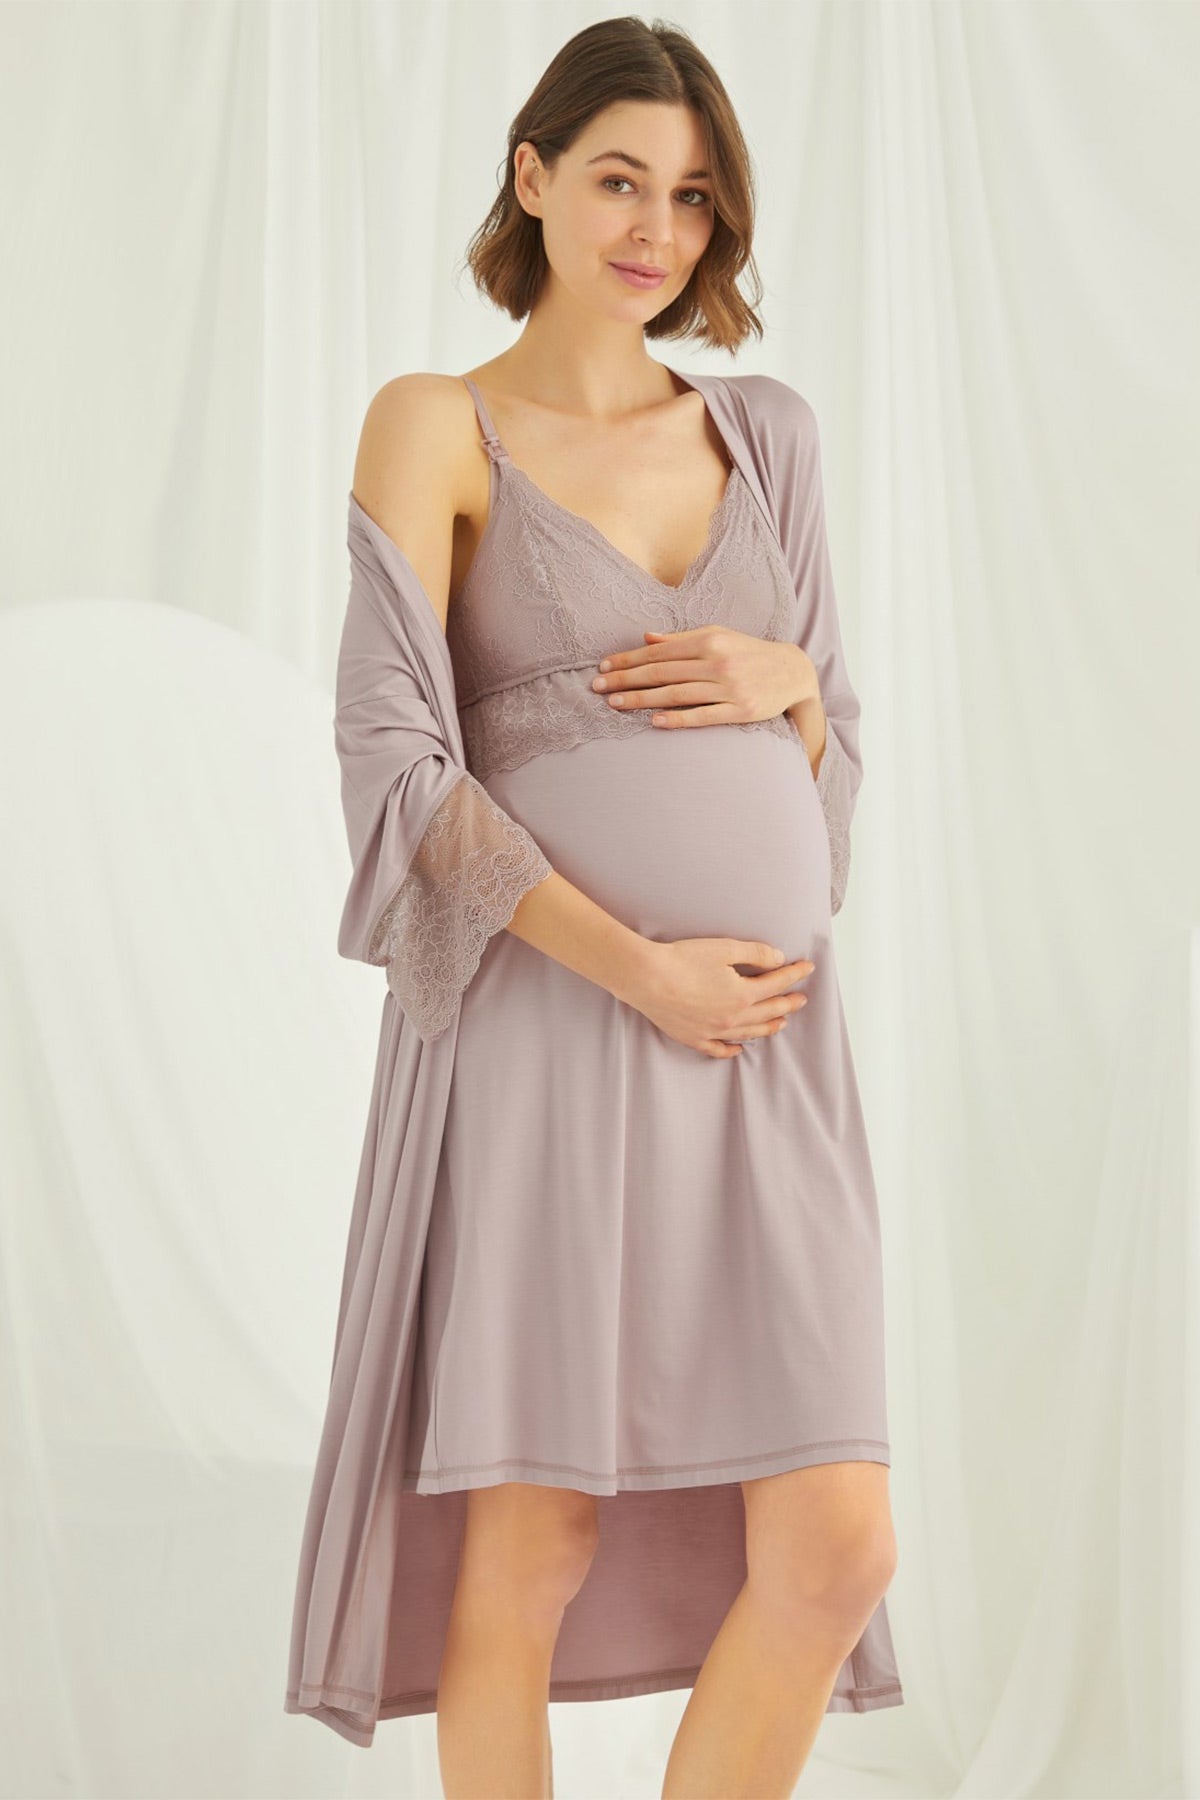 Shopymommy 18430 Lace Strappy Maternity & Nursing Nightgown With Robe Set Coffee